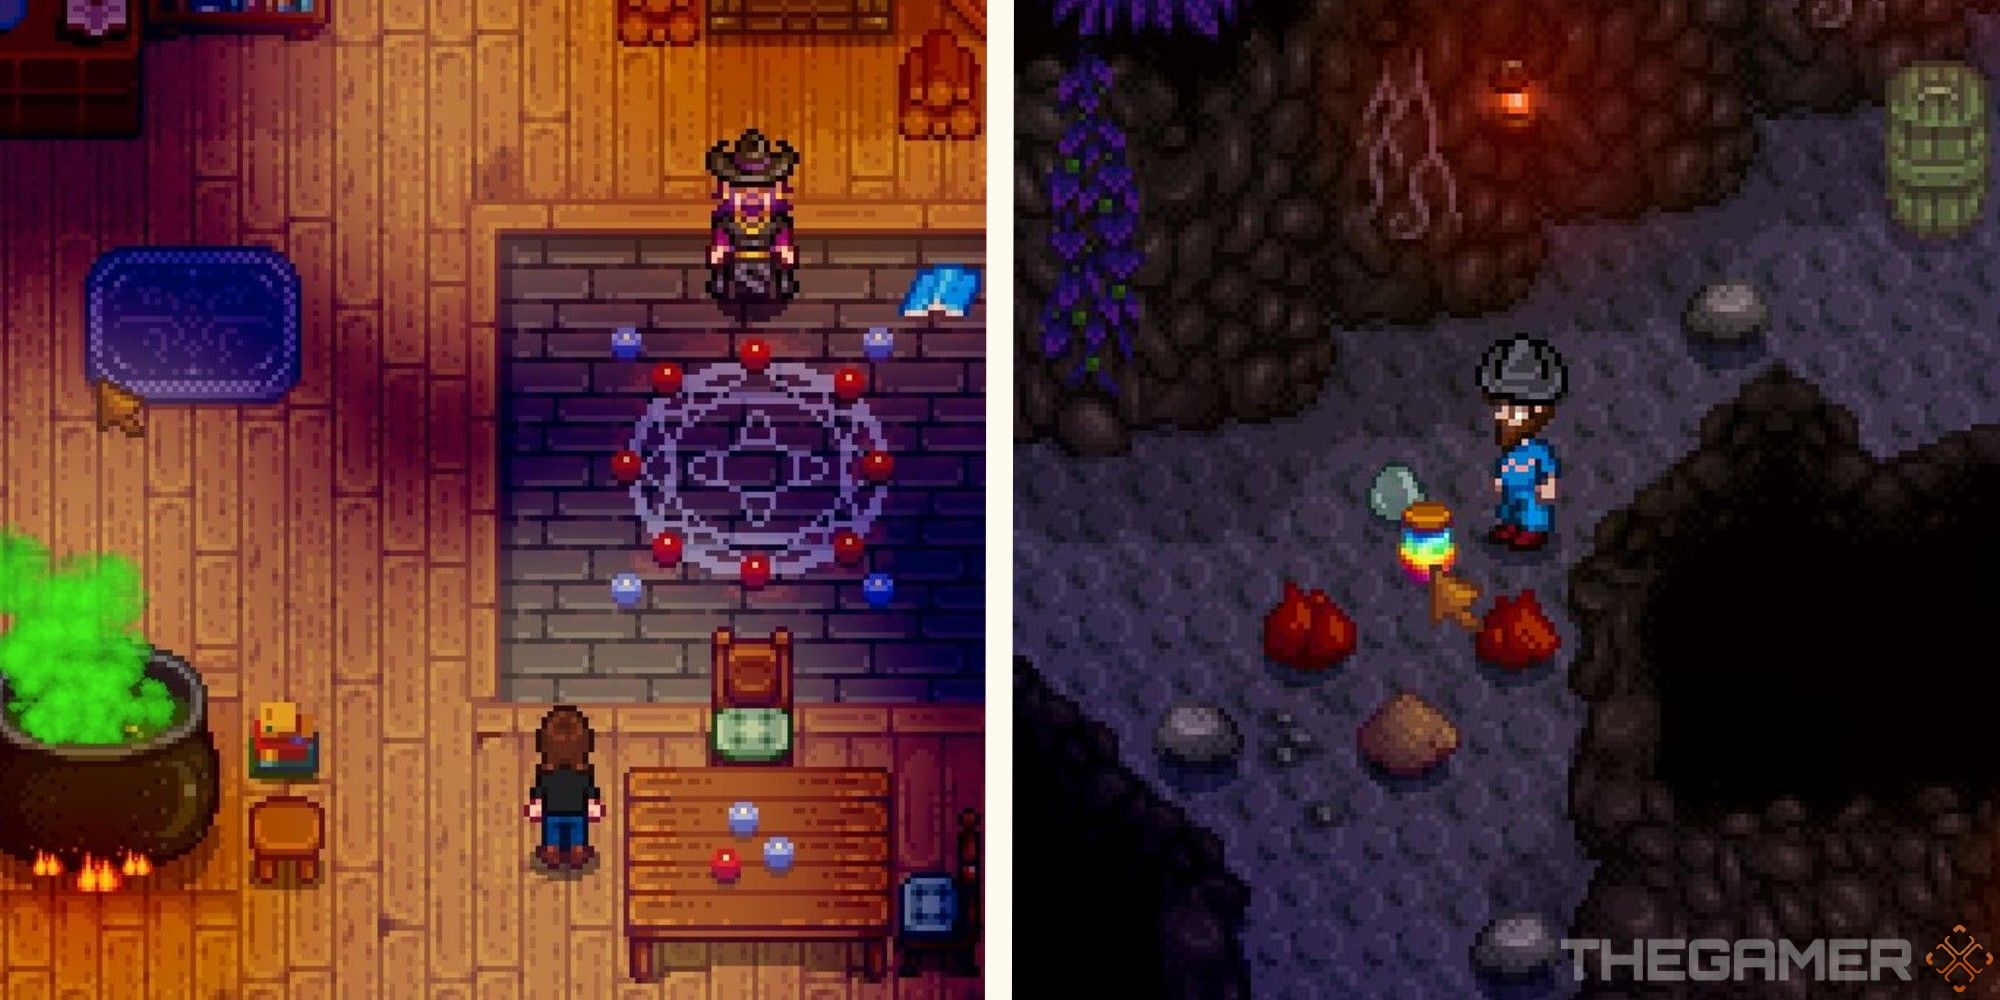 image of player in wizards hut next to image of player finding prismatic jelly